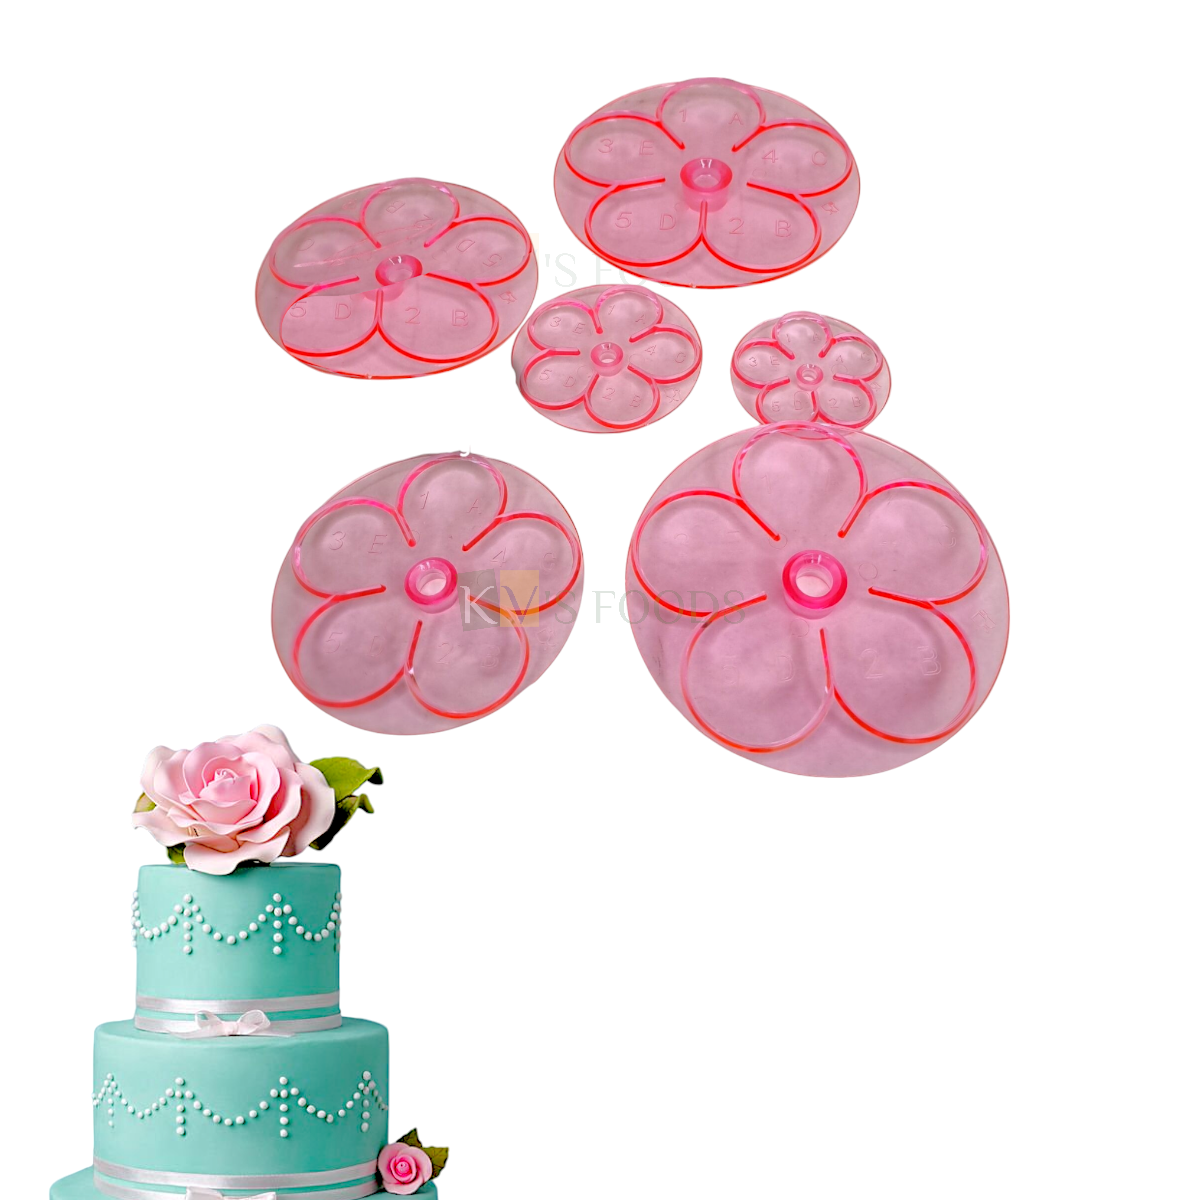 6 PCS Pink Different Sizes Rose Poeny Flower Petals Fondant Cutters, Molds, Embossing Presses Impression, Chocolates Pancake Cookies Birthday Wedding Anniversary Cakes Cupcake Decorations